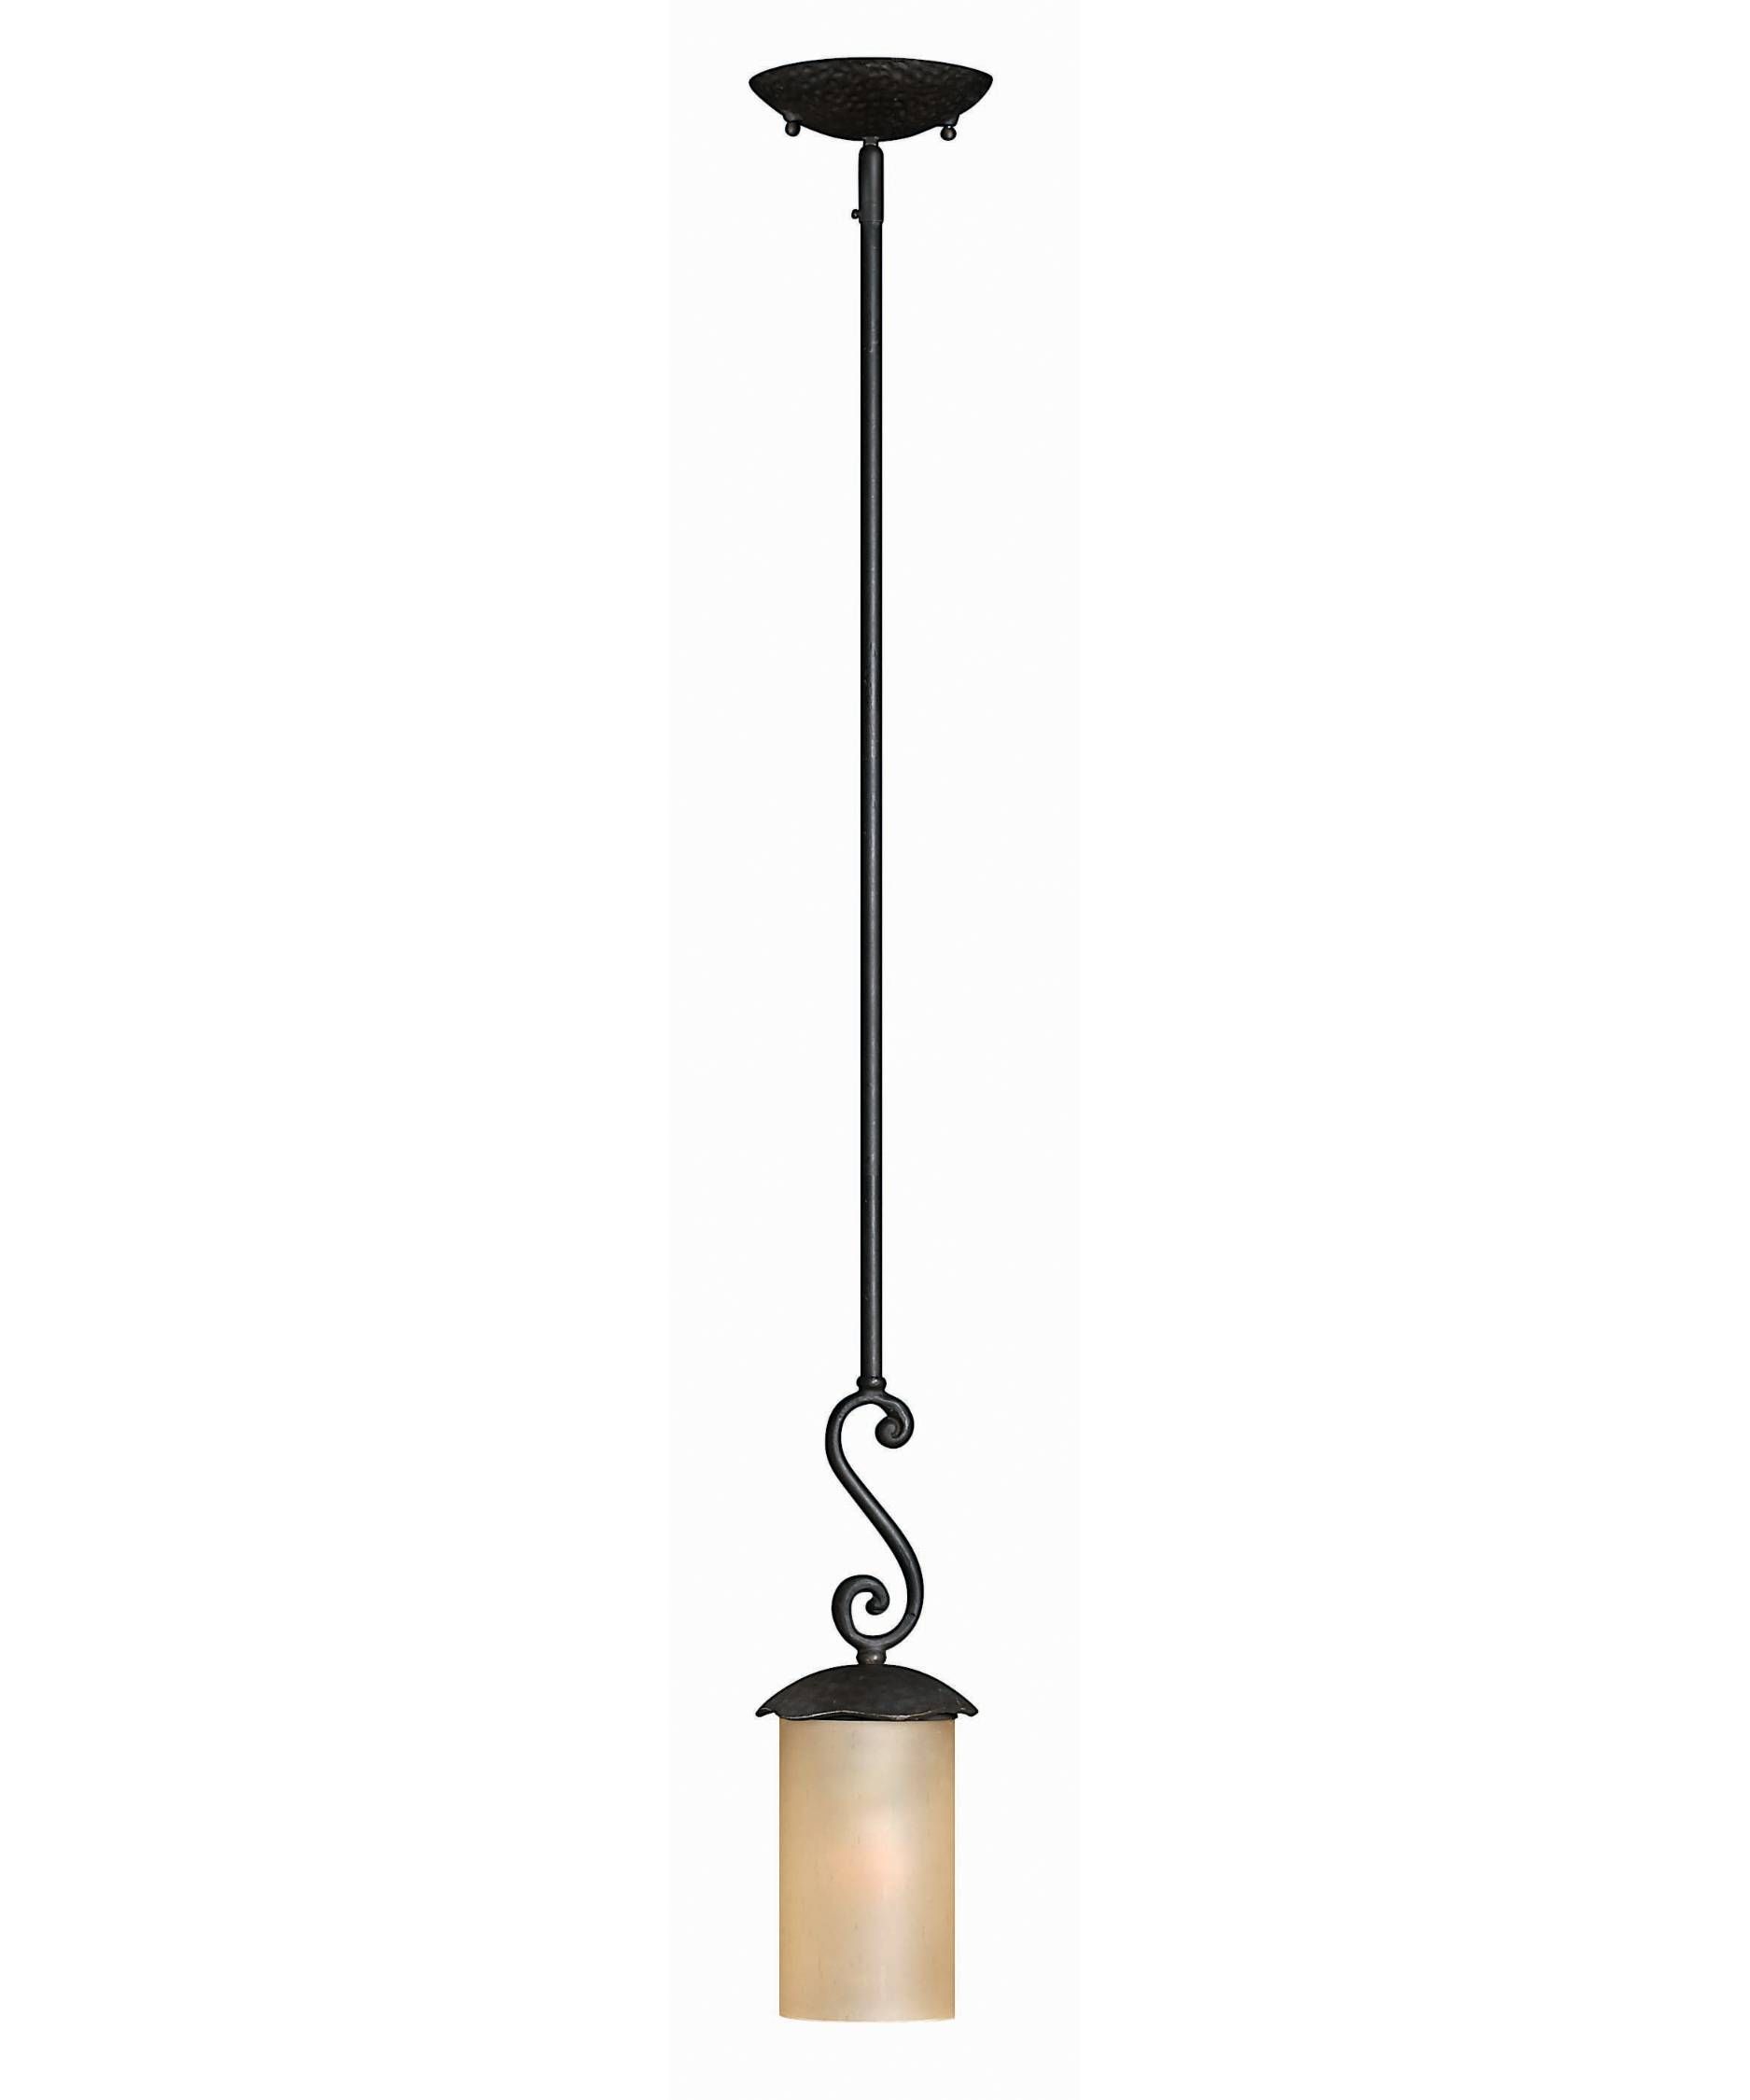 Black Wrought Iron Lighting Fixtures1 Copy Copy | Advice For Your Pertaining To Wrought Iron Light Pendants (View 12 of 15)